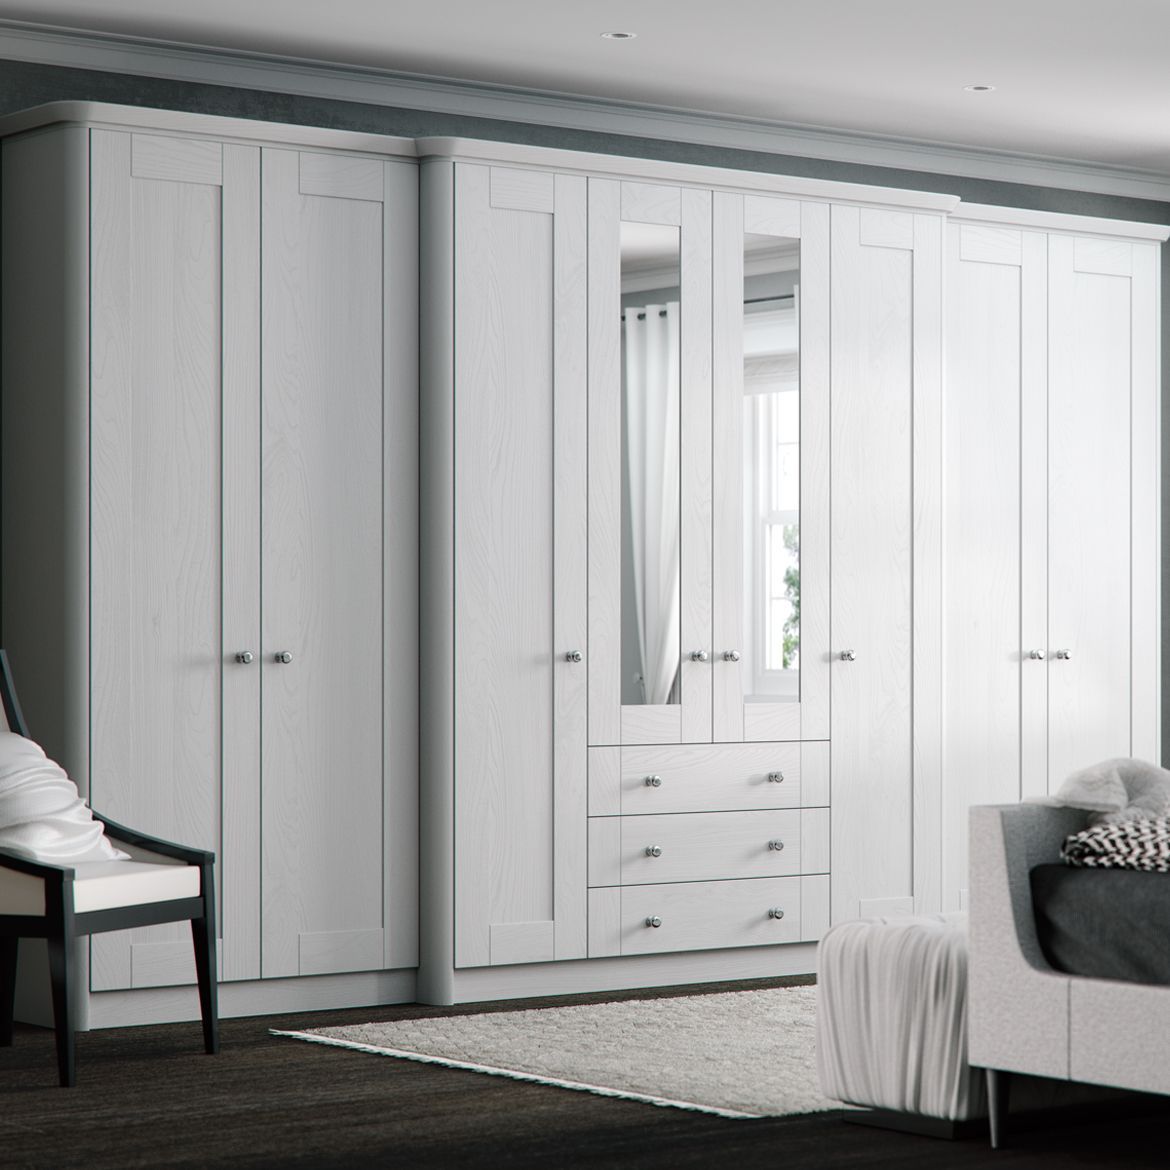 Aylesbury Wardrobe – Ivory | Cash & Carry Kitchens Intended For Ivory Wardrobes (Photo 3 of 15)